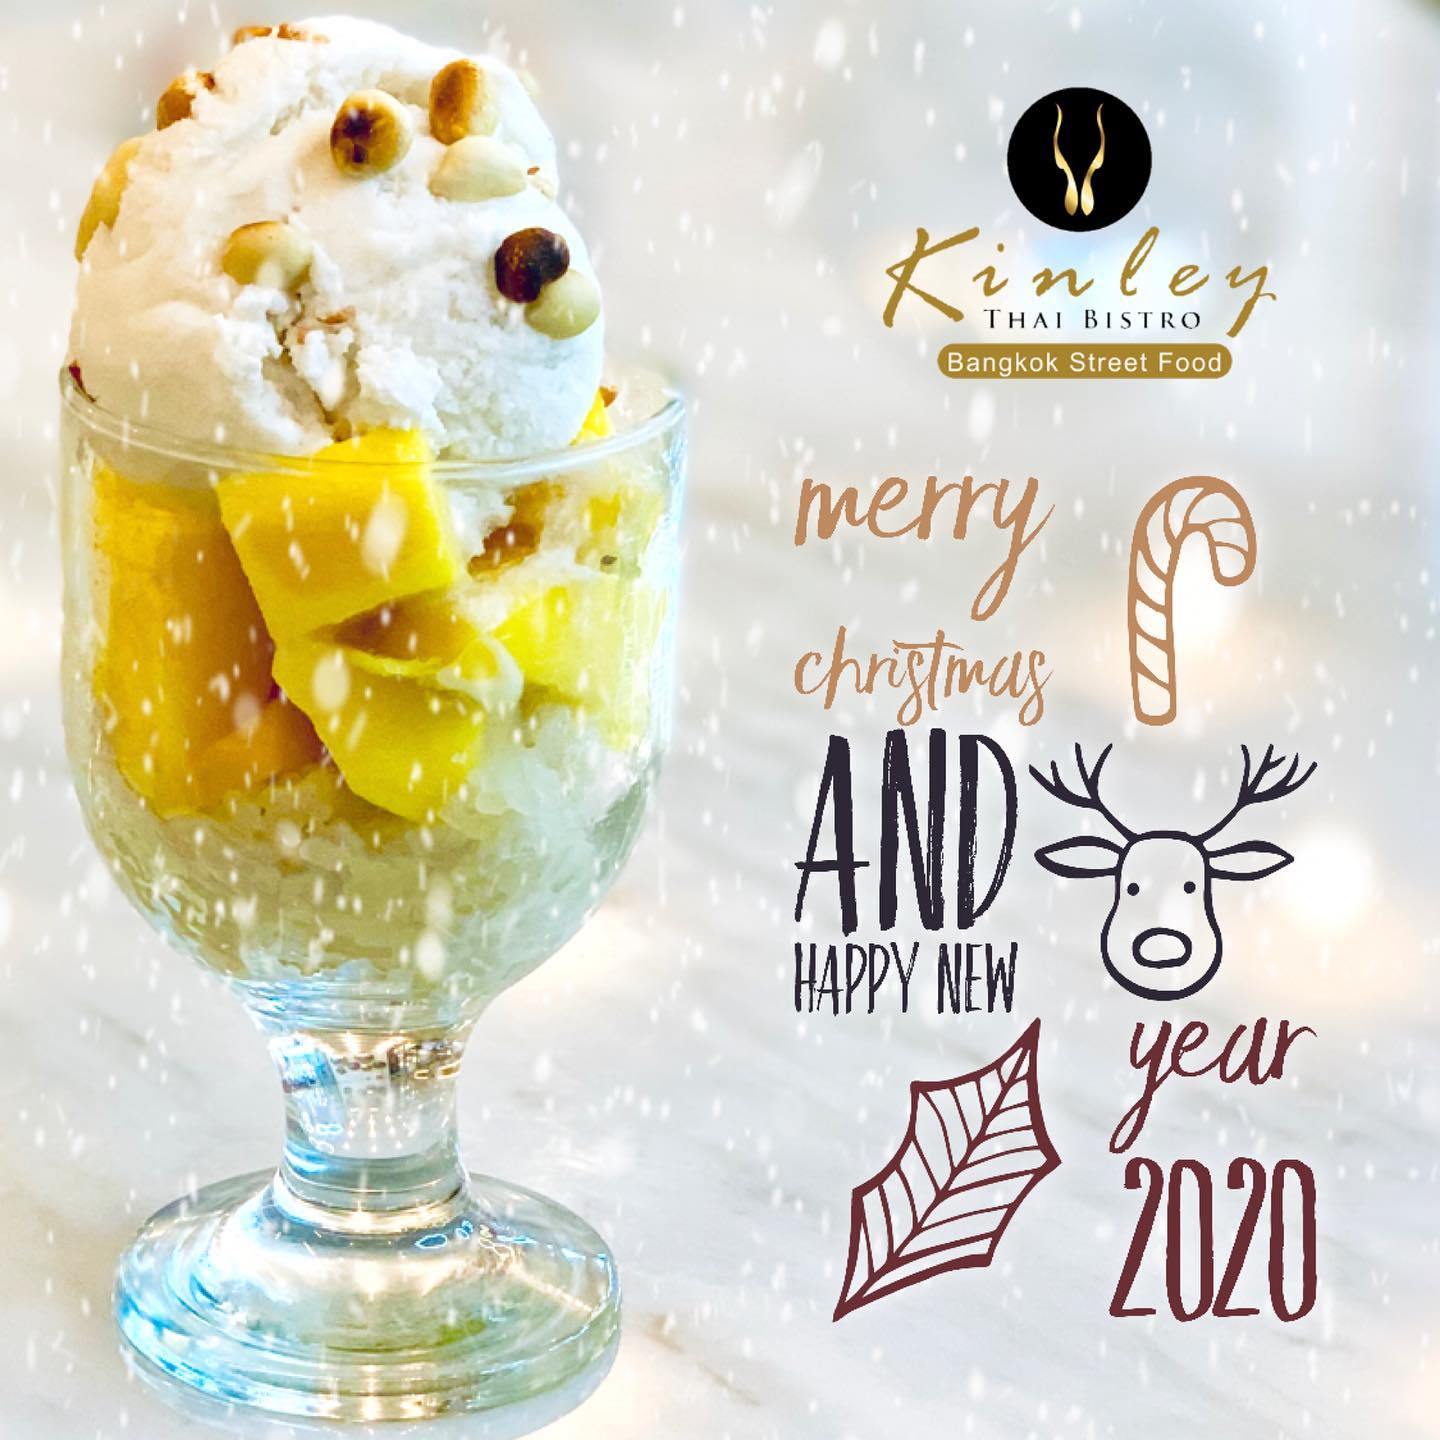 Wishing you a very Merry Christmas for those celebrating and Happy New Year 2020 for everyone.
We are OPEN 25 Dec 2019 from 11am and 01 Jan 2020 from 12pm
.
Inframe: Mango Parfait (pulut mangga plus ice cream coconut)